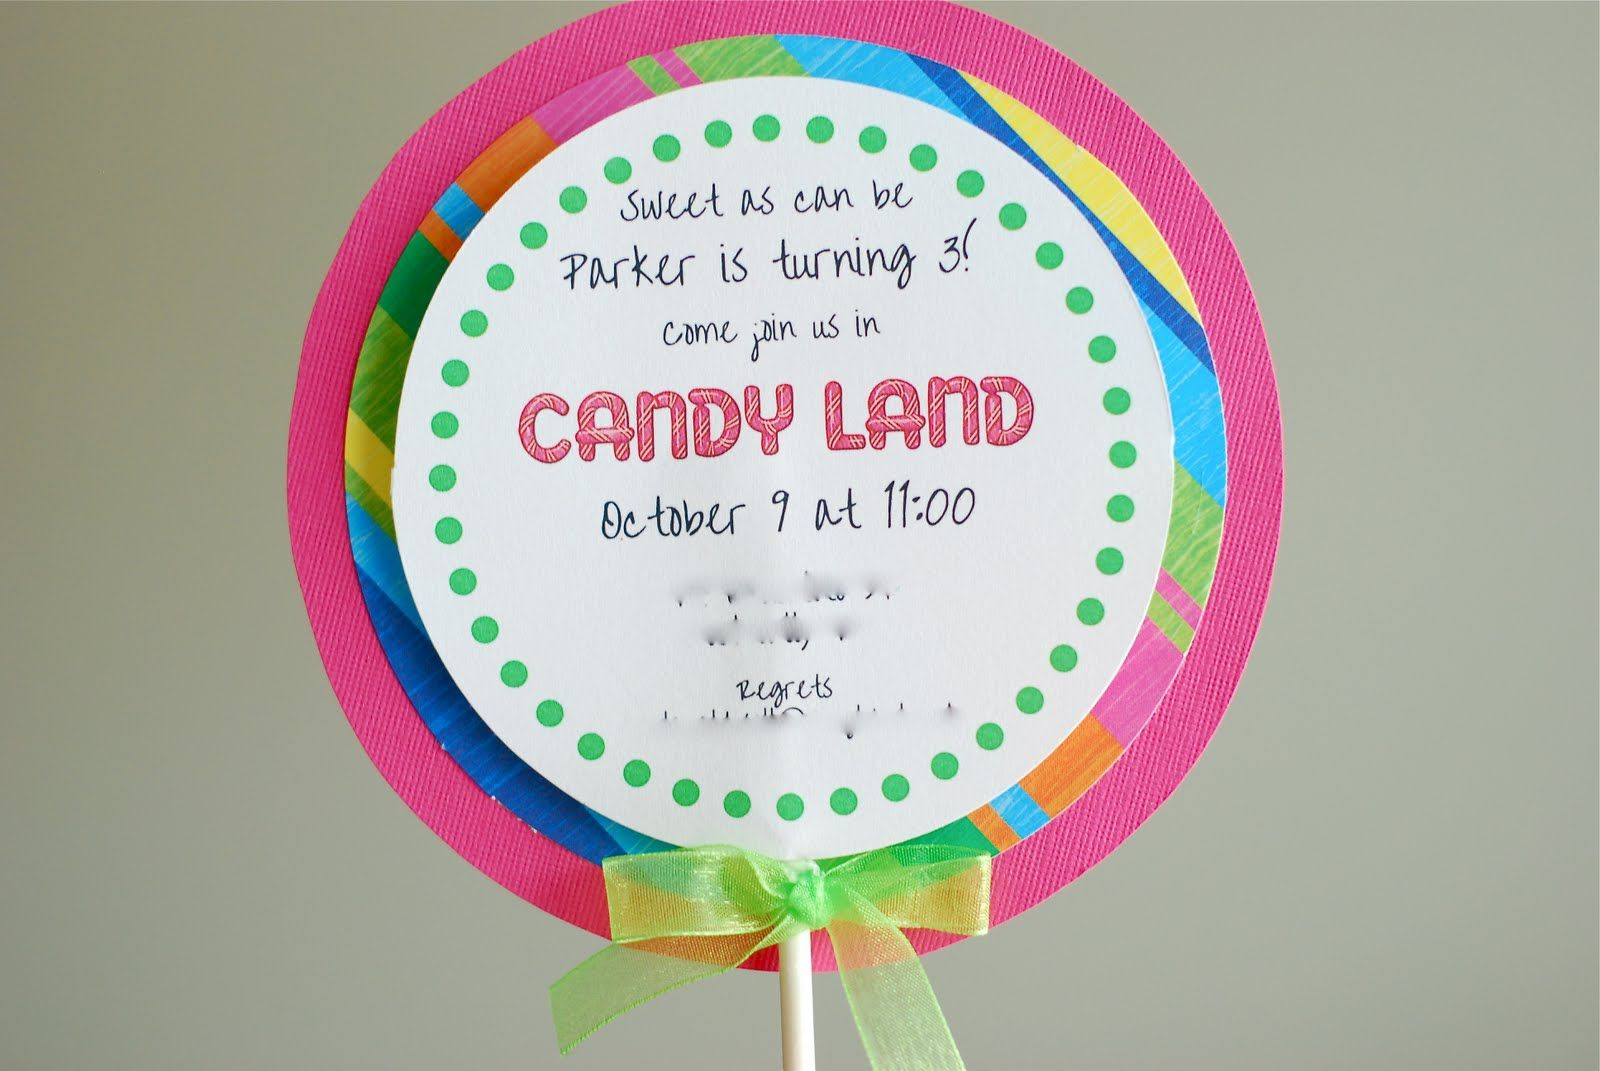 candyland-invitation-template-business-template-ideas